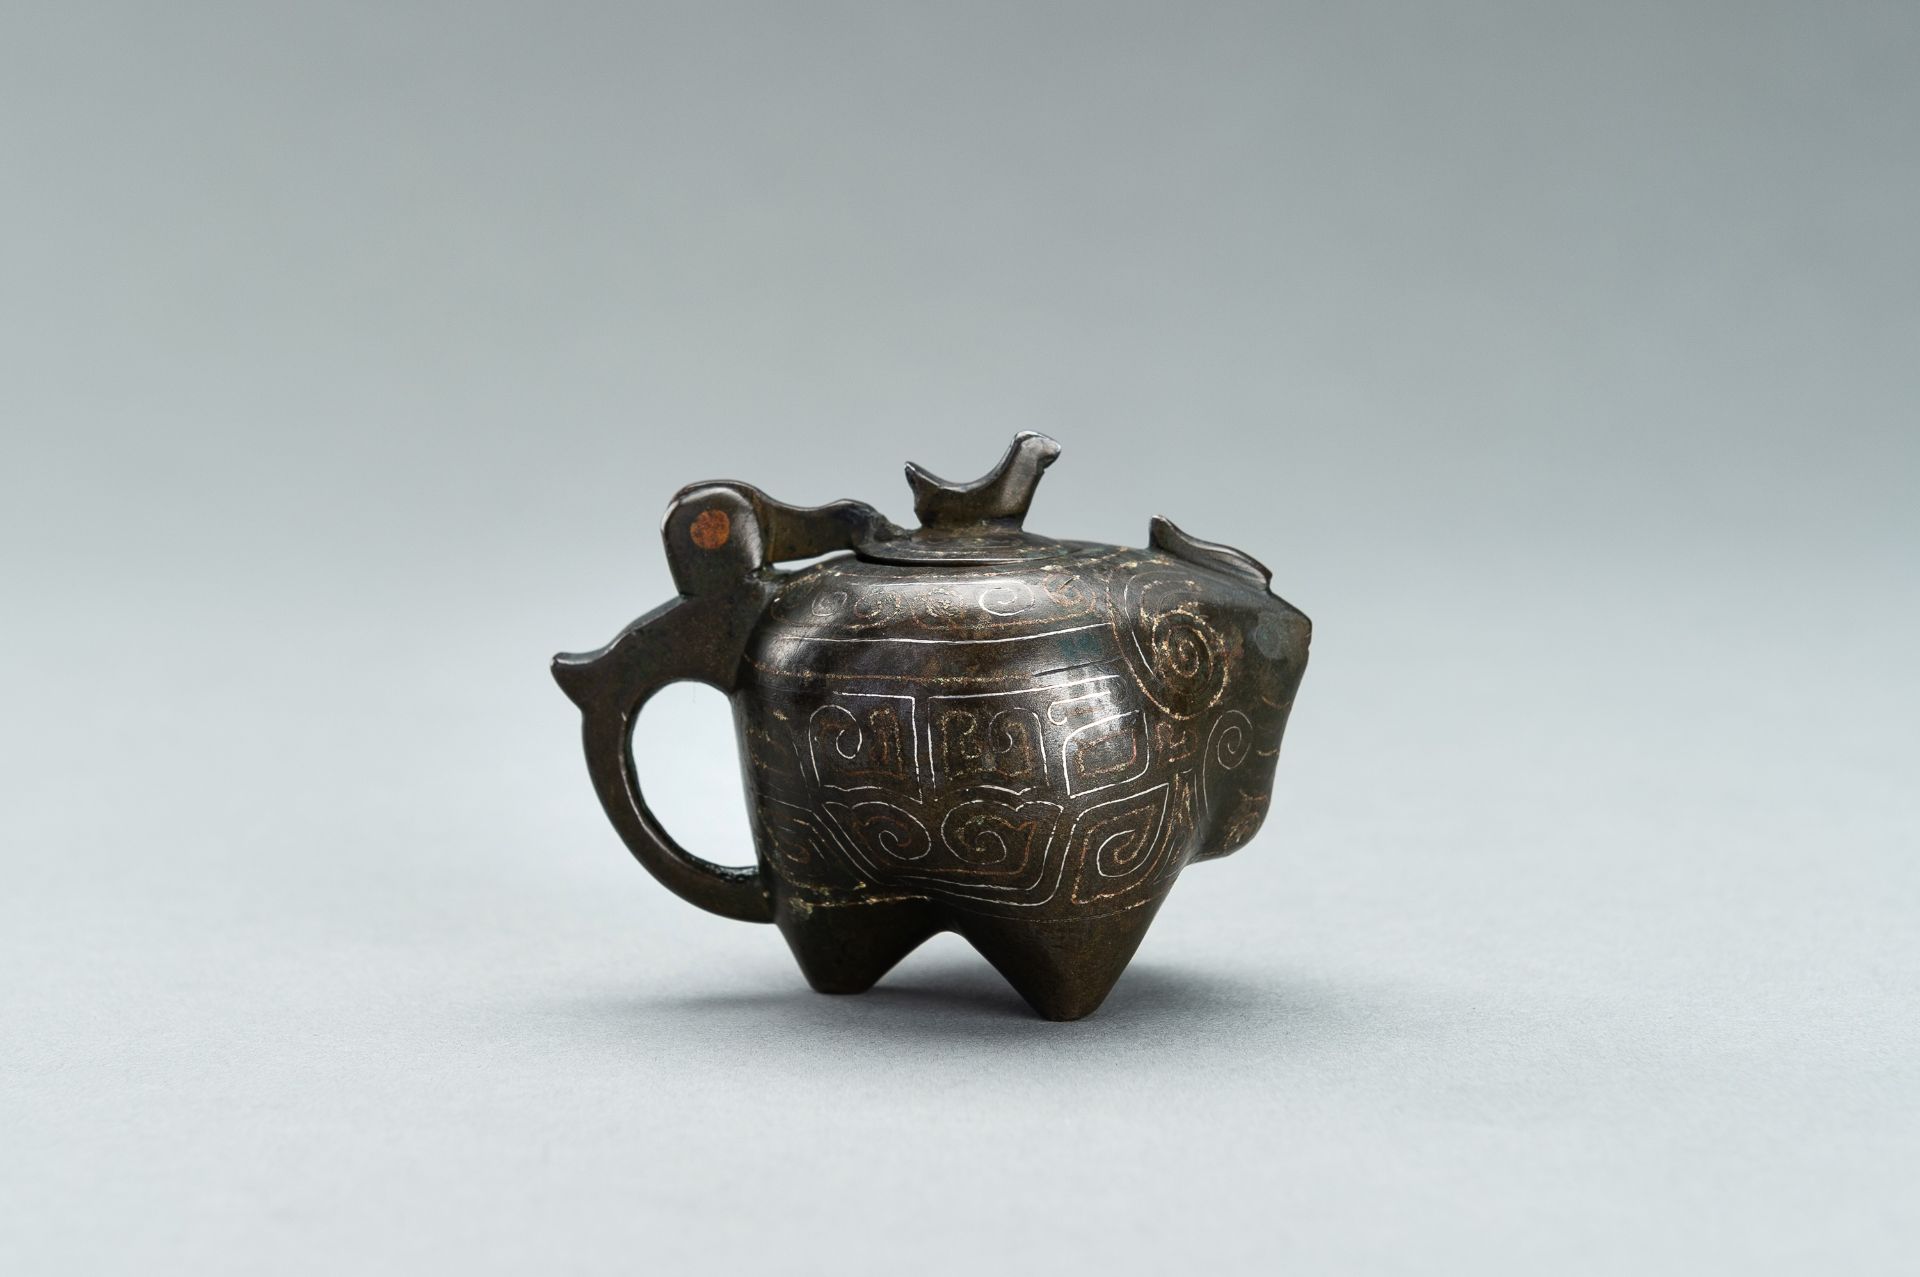 A SMALL COPPER AND SILVER INLAID BRONZE POURING TRIPOD VESSEL IN THE FORM OF AN ANIMAL, 17TH CENTURY - Image 4 of 11